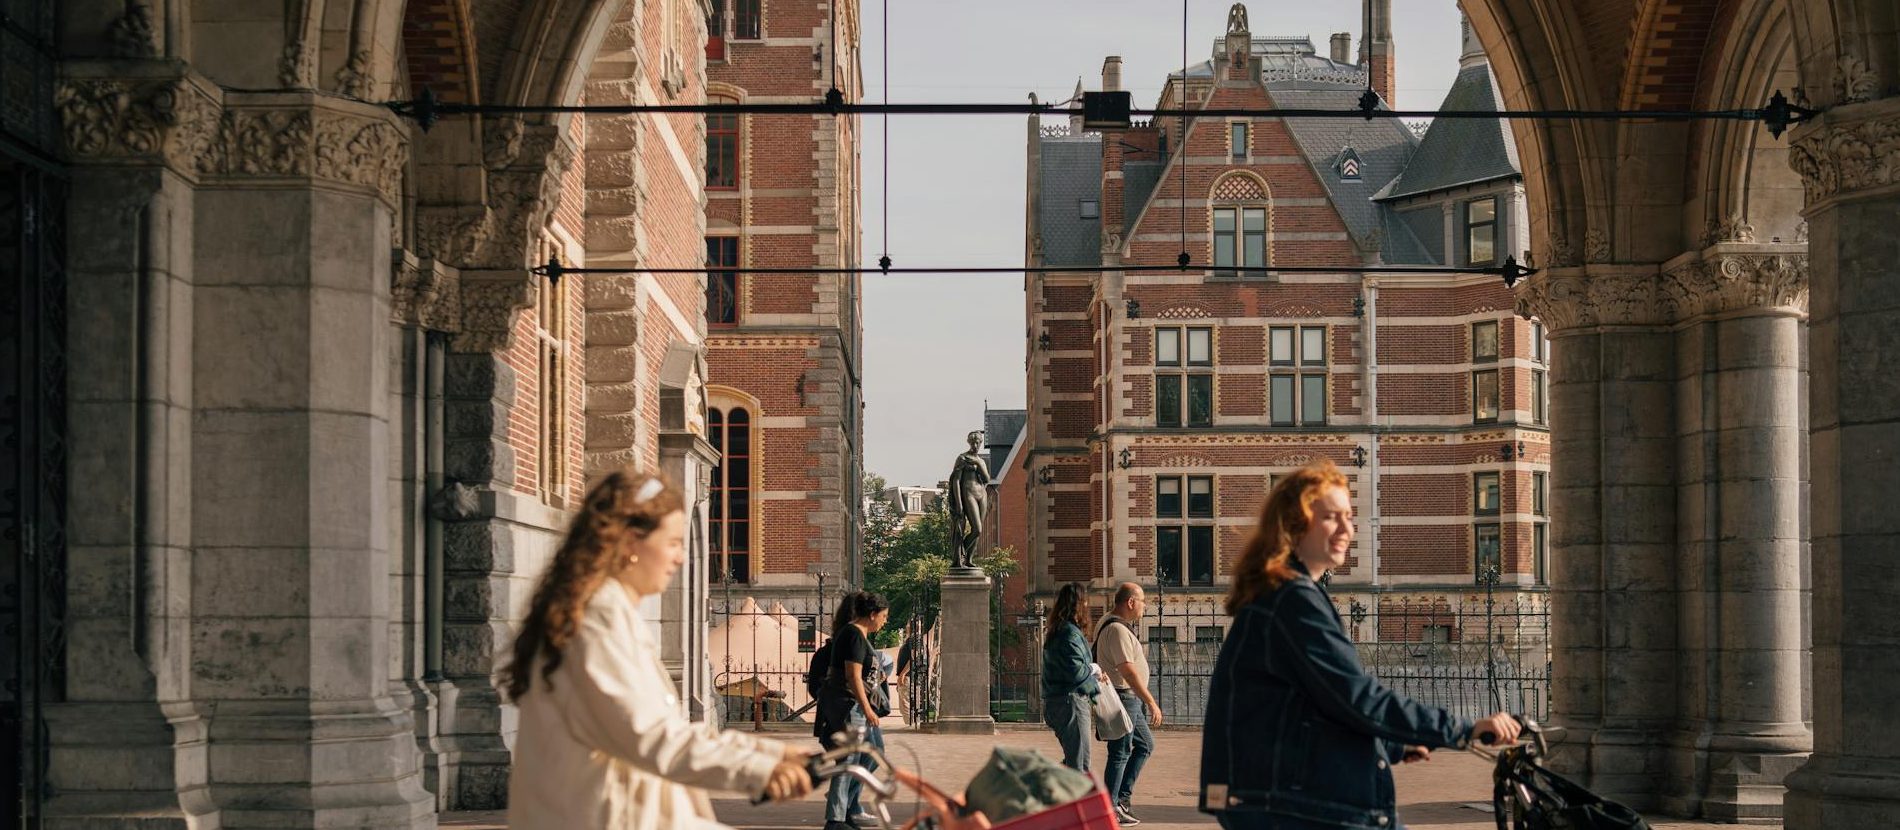 Is The Netherlands a Good Place to Live? Life in the Netherlands for Expats